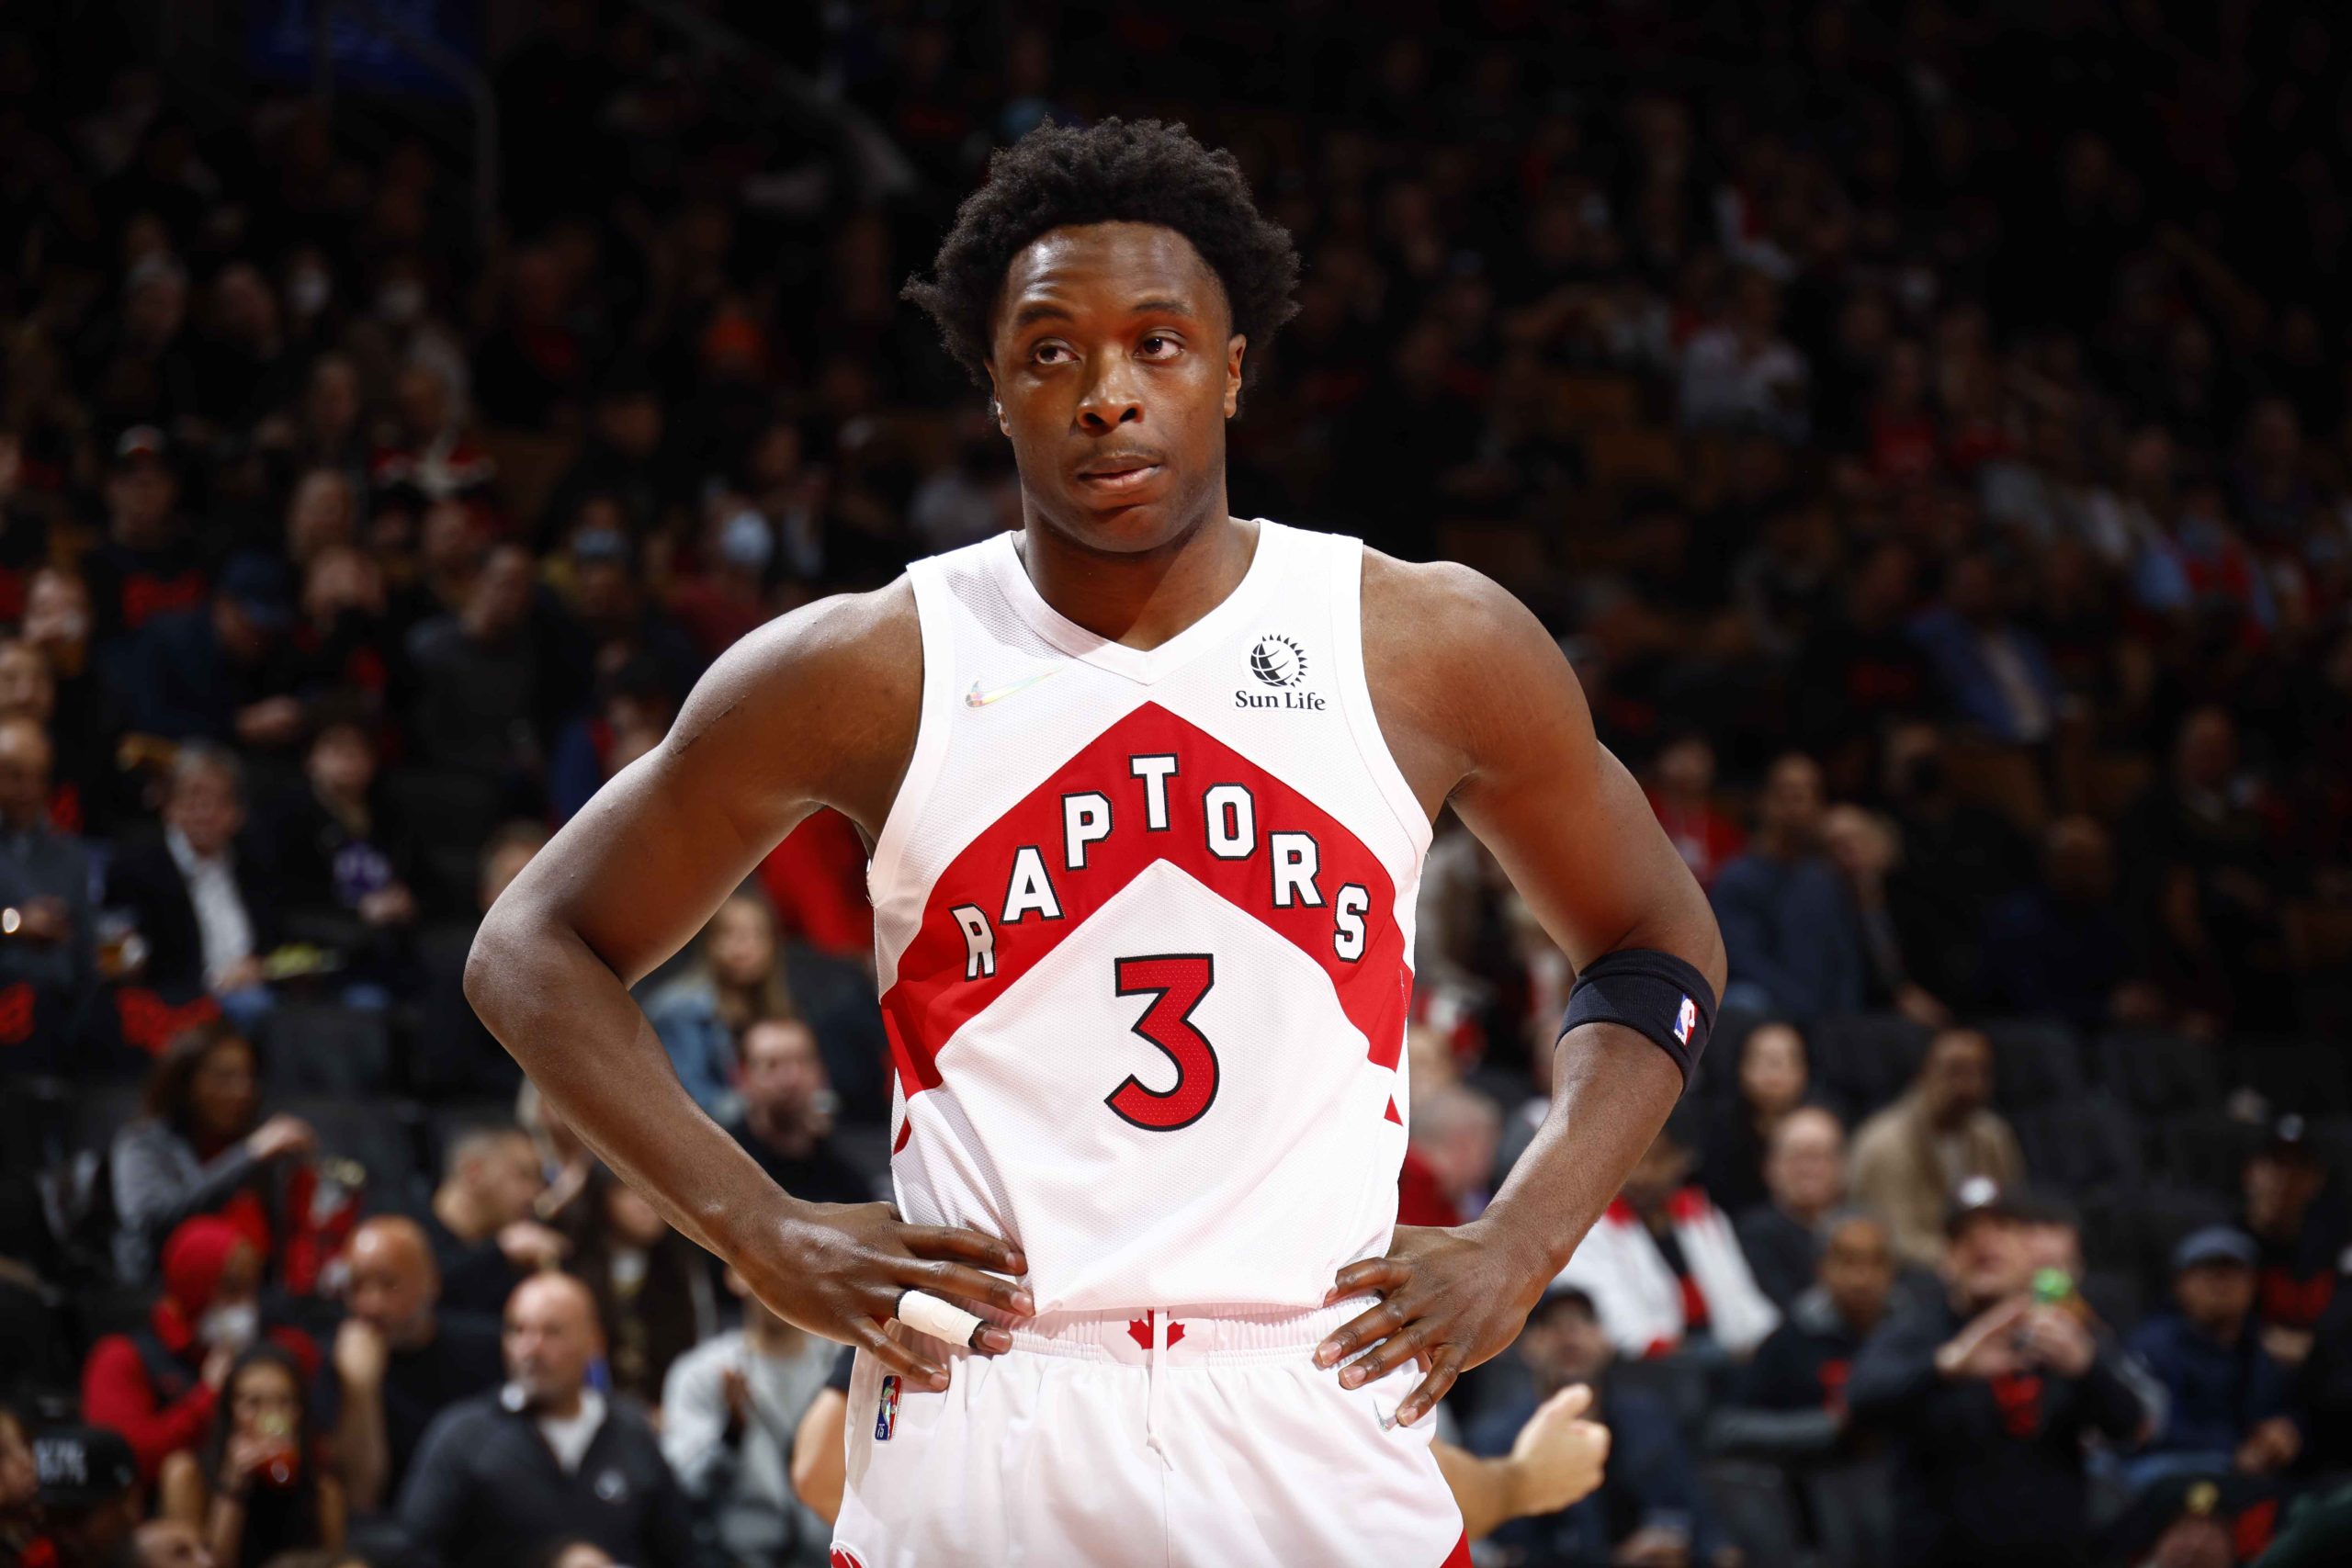 Memphis Grizzlies to Acquire OG Anunoby from the Toronto Raptors in a Fresh Trade Proposal